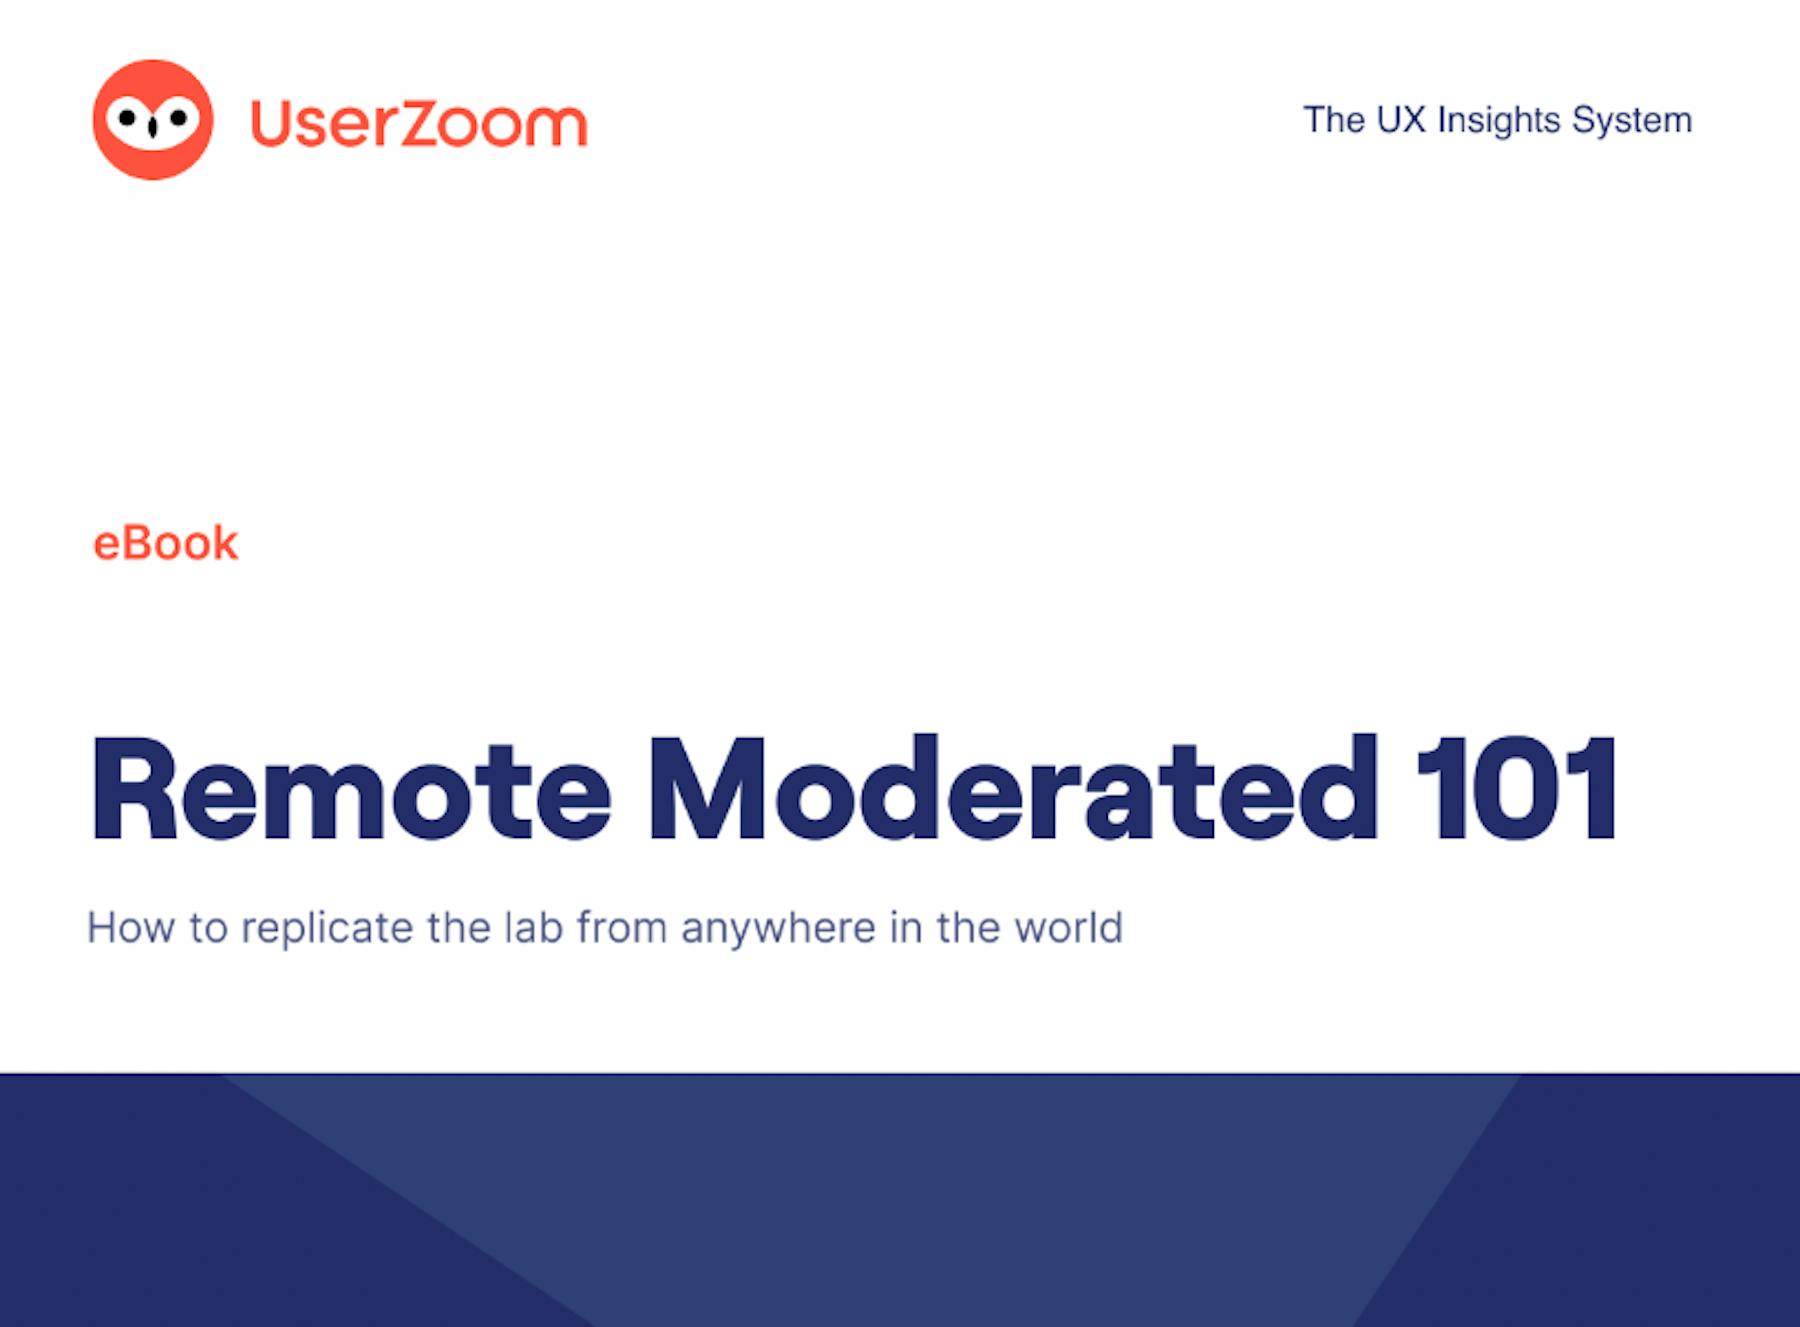 Remote moderated 101 Guide